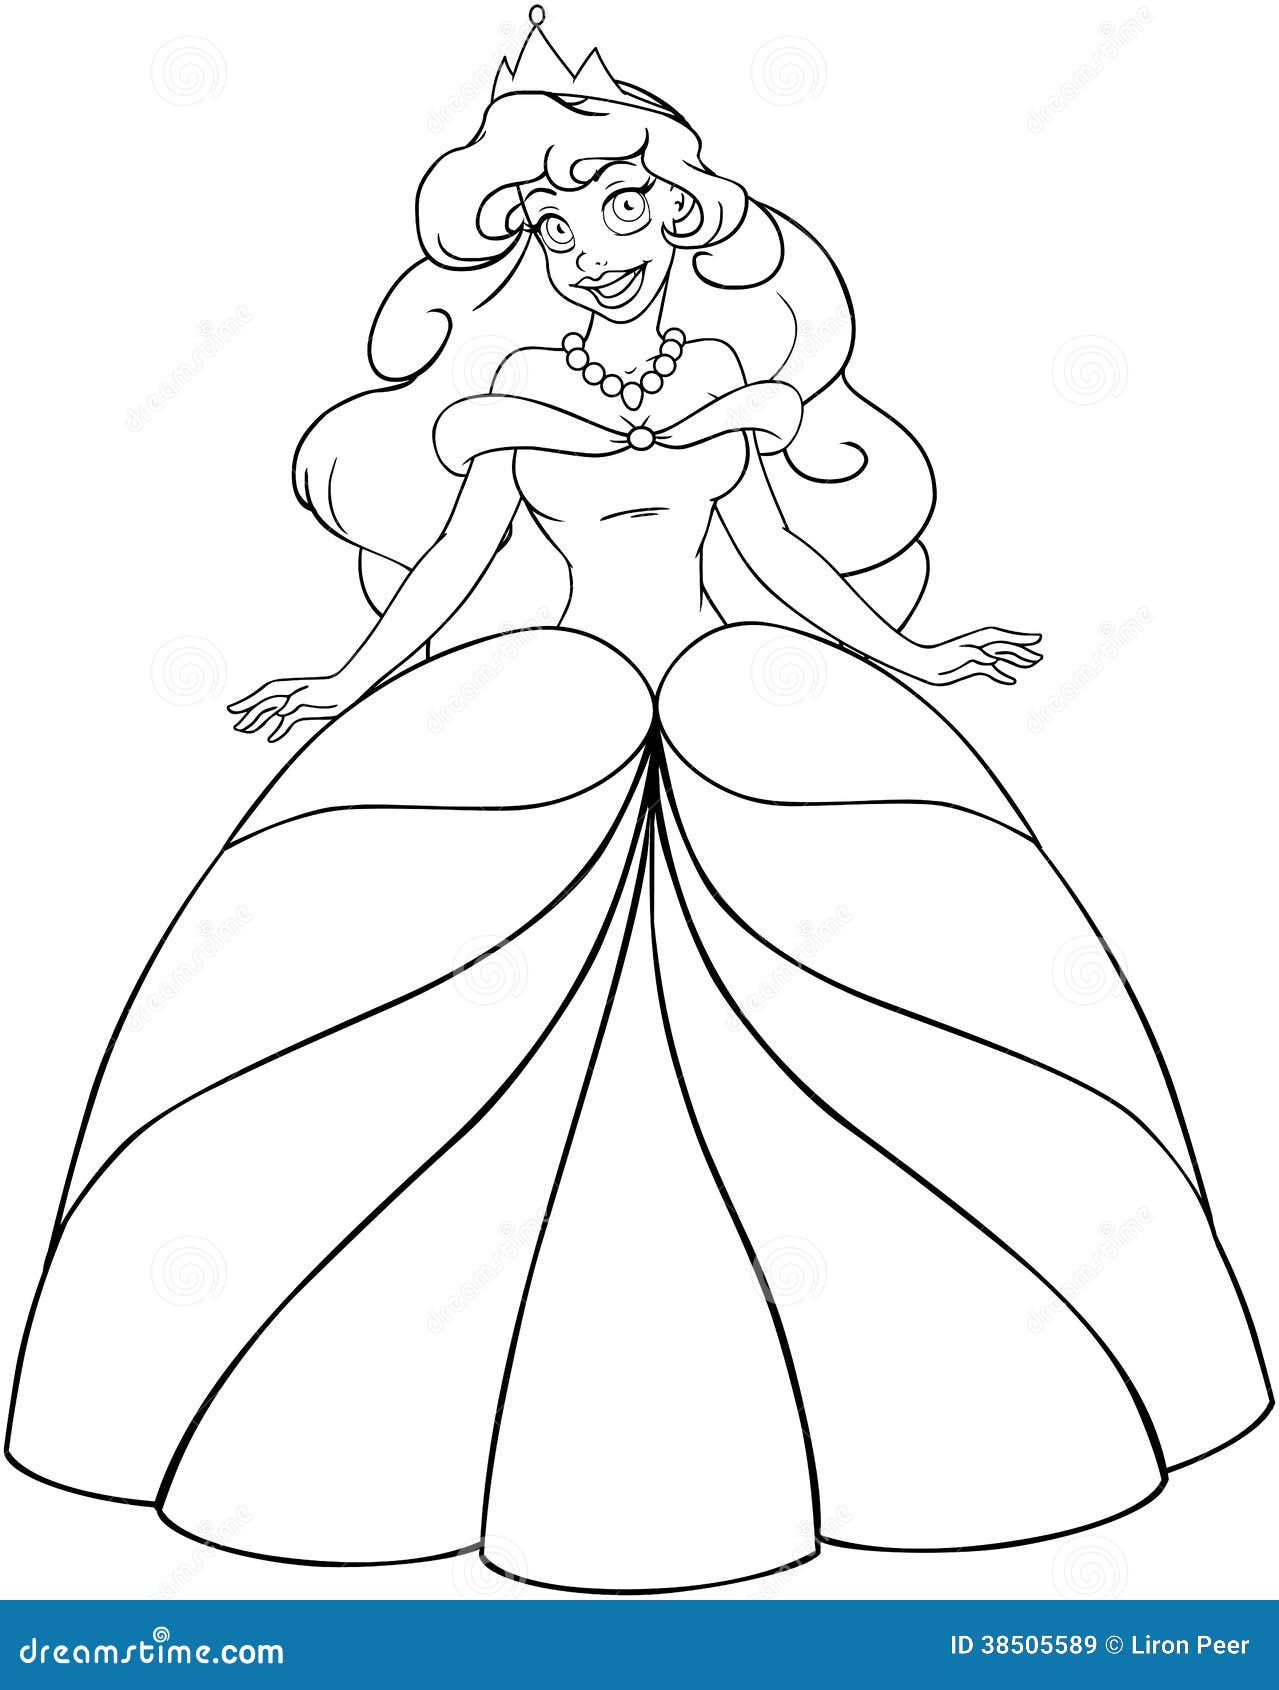 African Princess Coloring Page Stock Vector - Illustration 